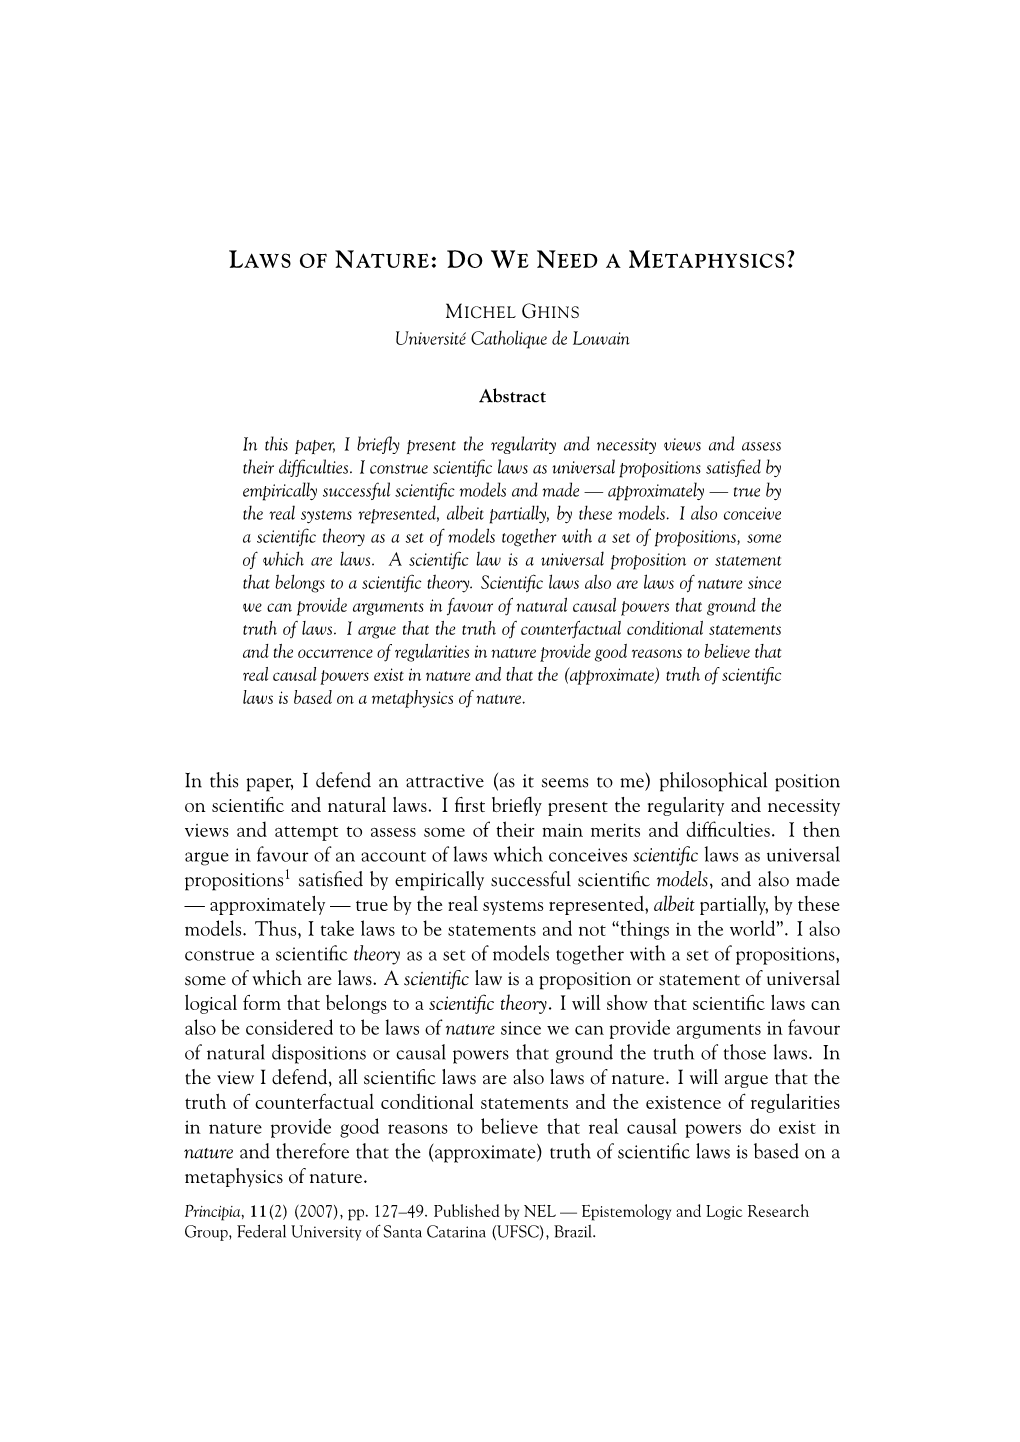 LAWS of NATURE: DO WE NEED a METAPHYSICS? in This Paper, I Defend an Attractive (As It Seems to Me) Philosophical Position on Sc